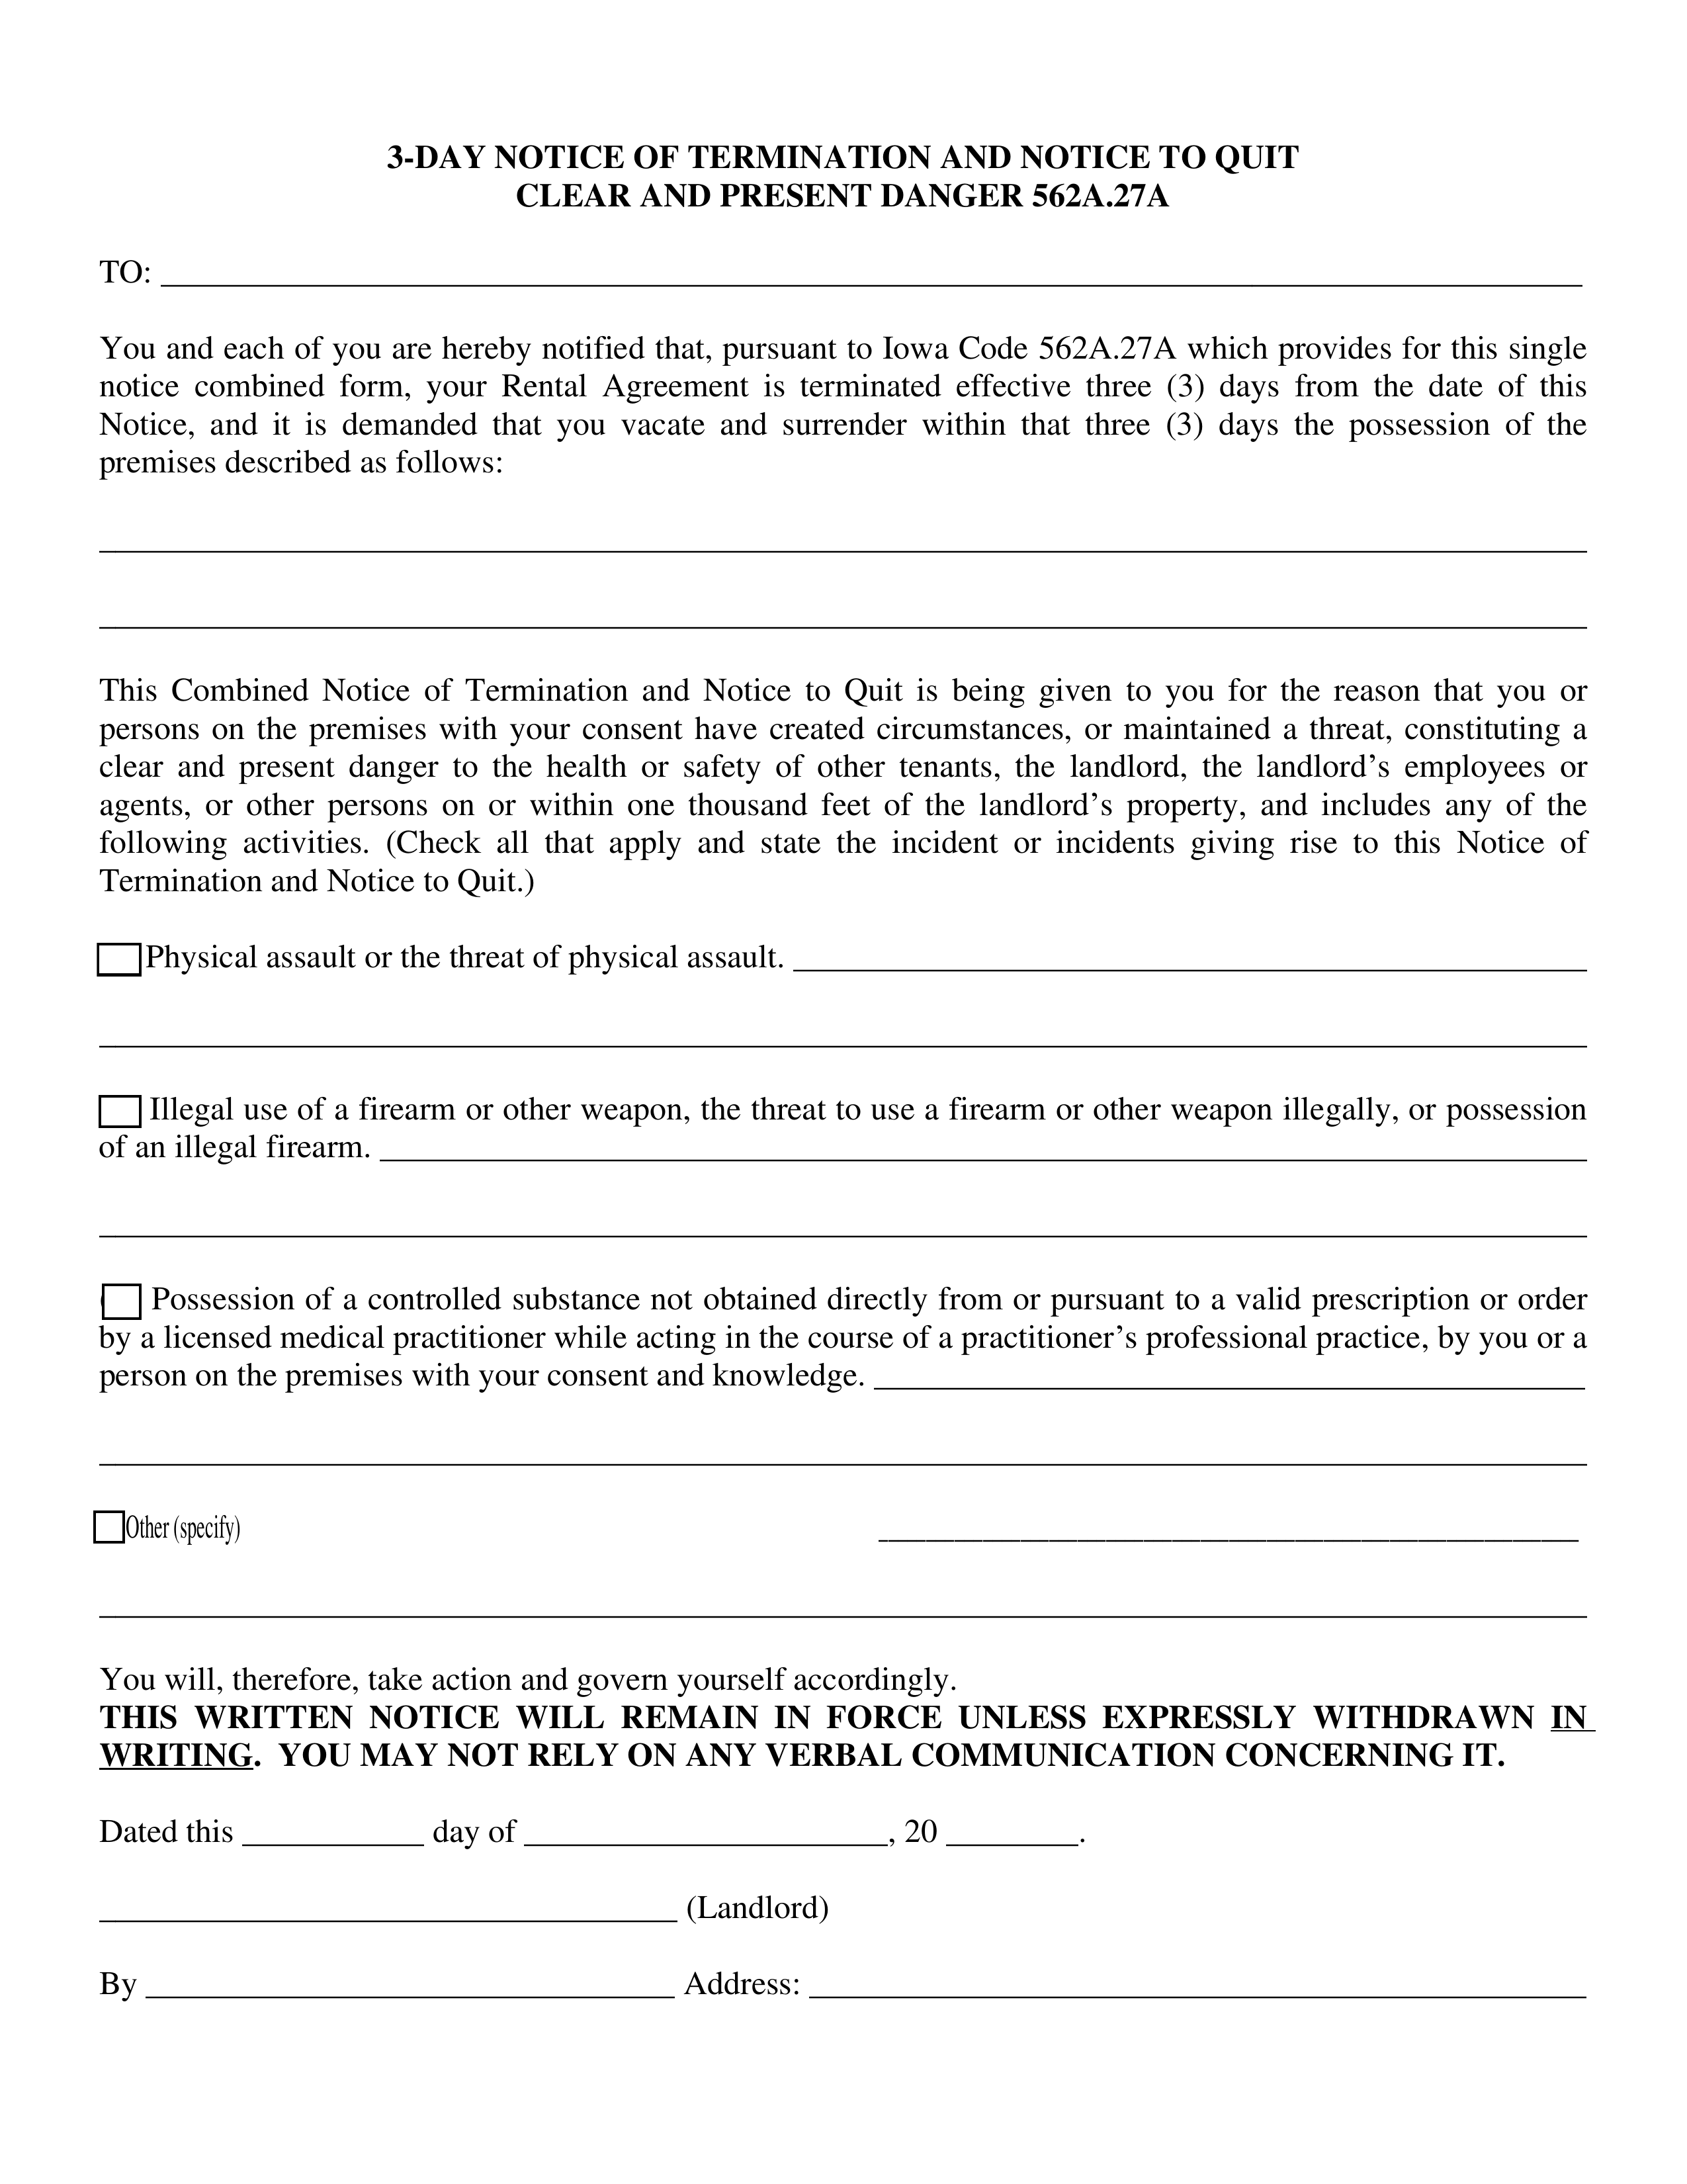 Iowa 3-Day Notice to Quit Form | Danger or Abuse